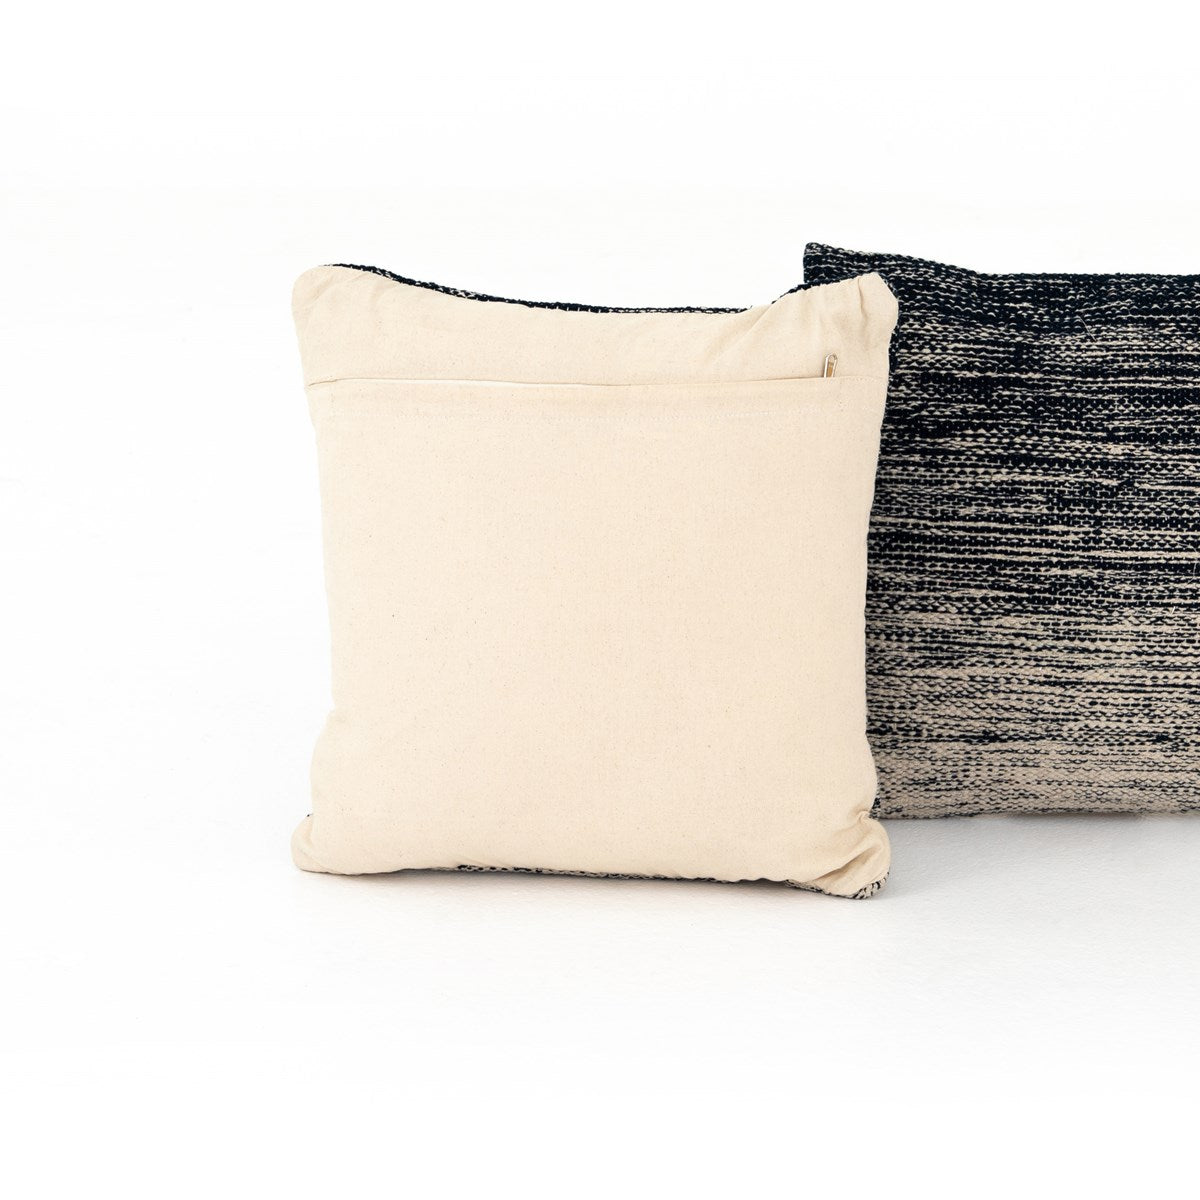 Midnight Ombre Pillow, Set of 2 Pillow Four Hands     Four Hands, Burke Decor, Mid Century Modern Furniture, Old Bones Furniture Company, Old Bones Co, Modern Mid Century, Designer Furniture, https://www.oldbonesco.com/